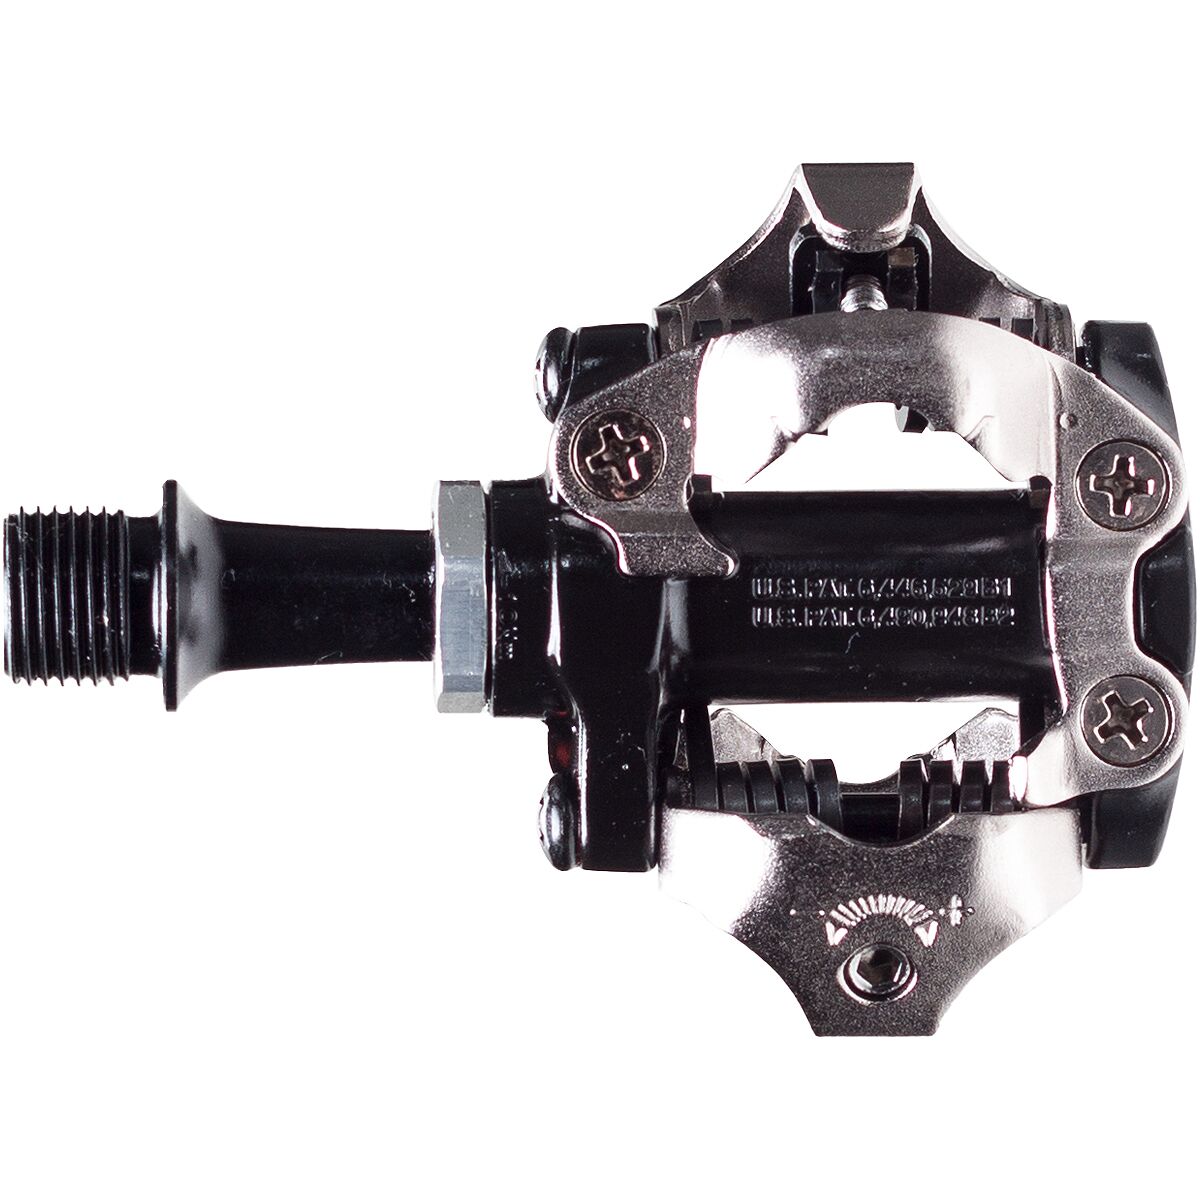 Photos - Bicycle Parts Shimano PD-M540 SPD Pedals 